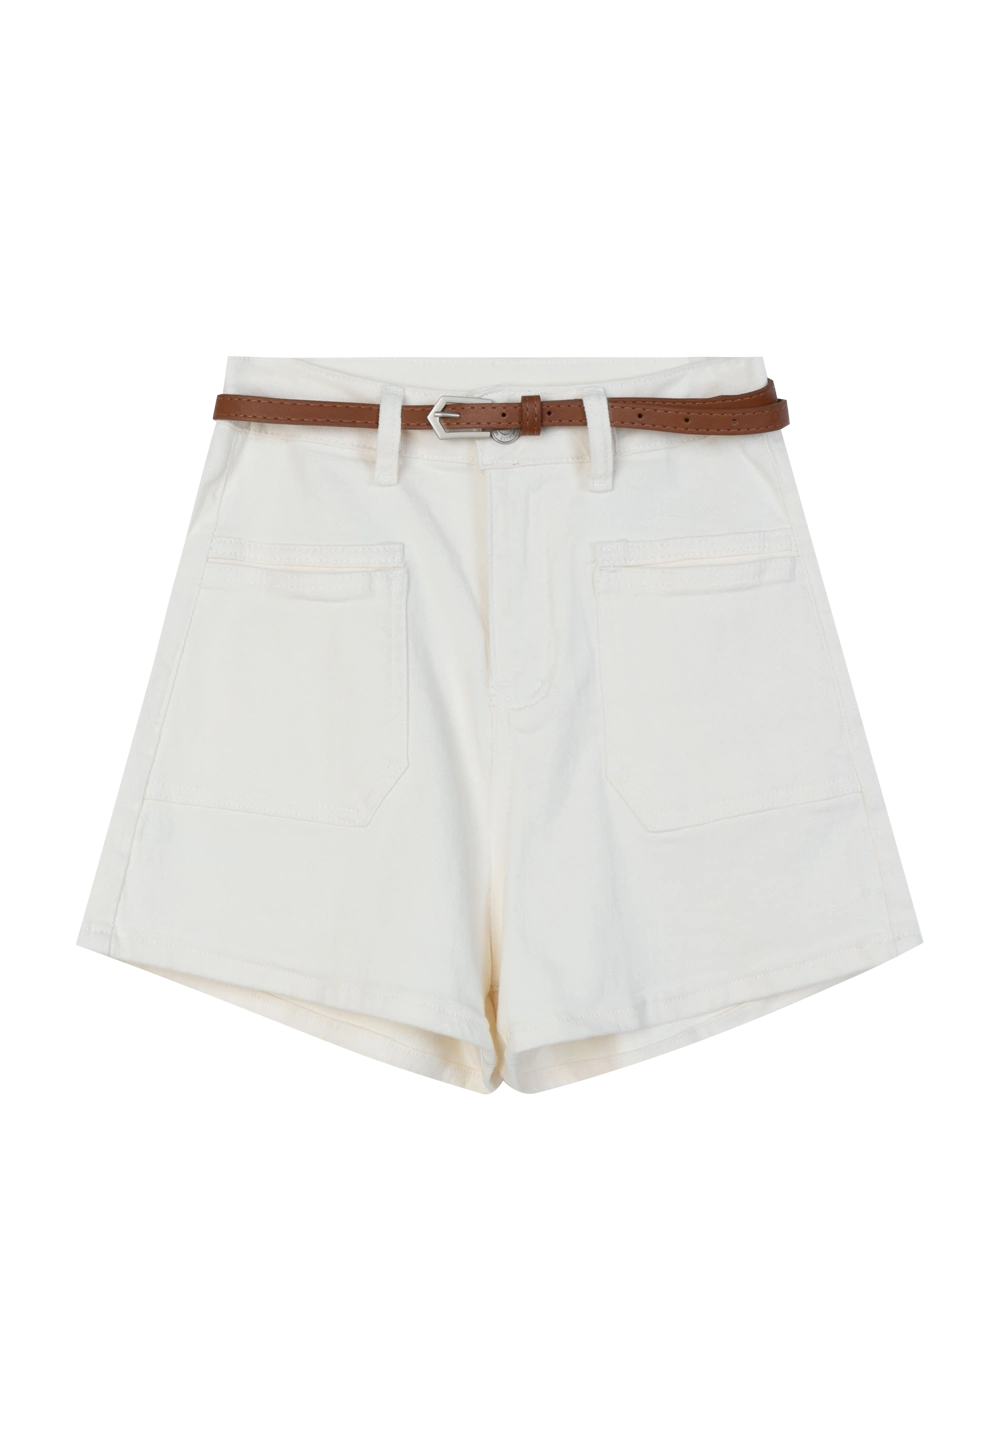 Classic High-Waisted Denim Shorts with Brown Leather Belt - Versatile Summer Style